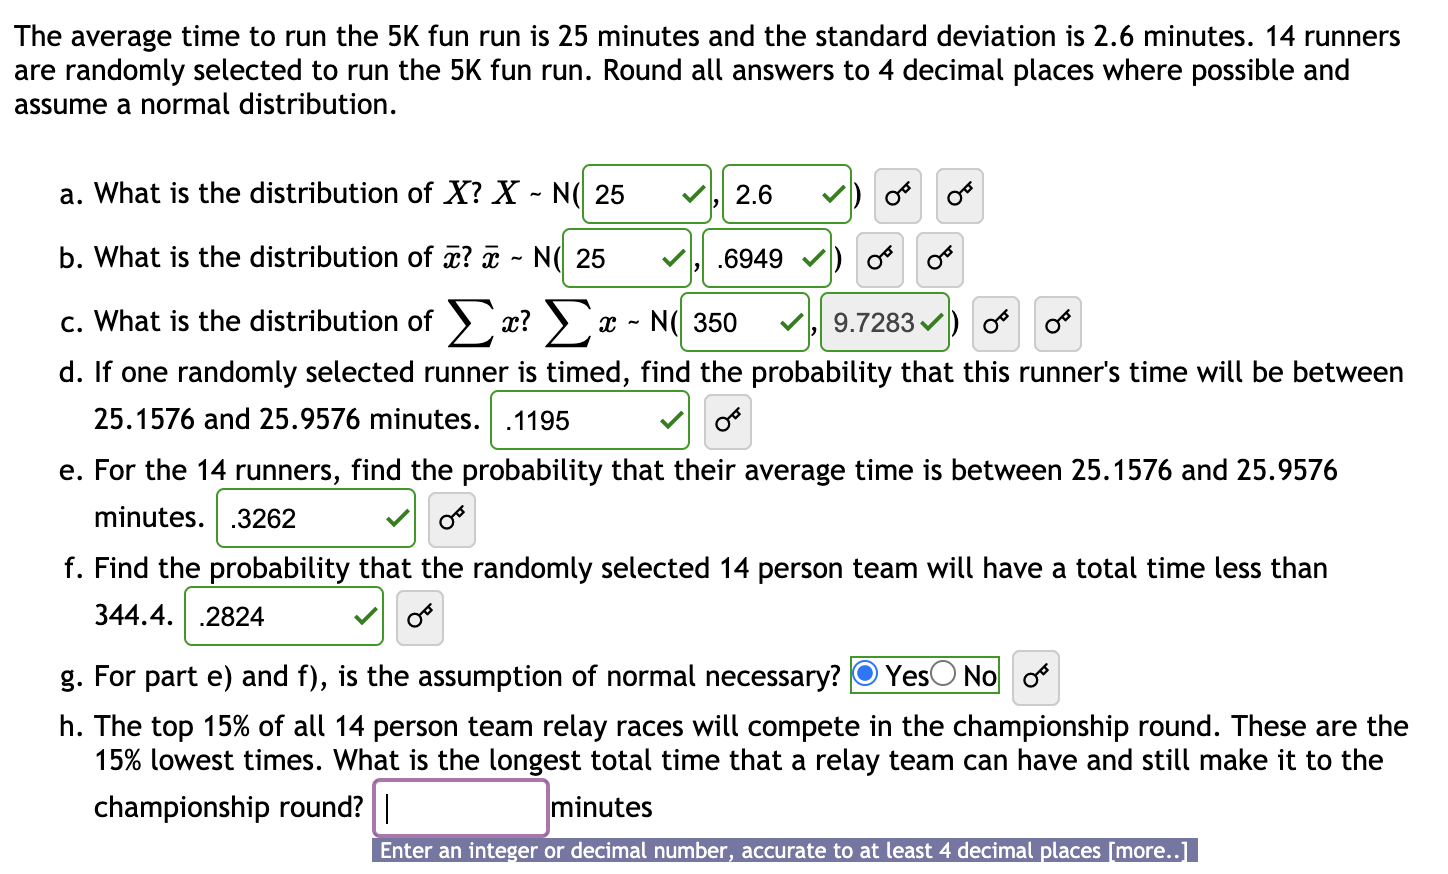 The average time to run the 5K fun run is 25 minutes and the standard deviation is 2.6 minutes. 14 runners
are randomly selected to run the 5K fun run. Round all answers to 4 decimal places where possible and
assume a normal distribution.
a. What is the distribution of X? X - N( 25
2.6
b. What is the distribution of a? ¤ - N( 25
.6949
c. What is the distribution of ) x? )
N( 350
9.7283 ) o
d. If one randomly selected runner is timed, find the probability that this runner's time will be between
25.1576 and 25.9576 minutes. .1195
e. For the 14 runners, find the probability that their average time is between 25.1576 and 25.9576
minutes. .3262
